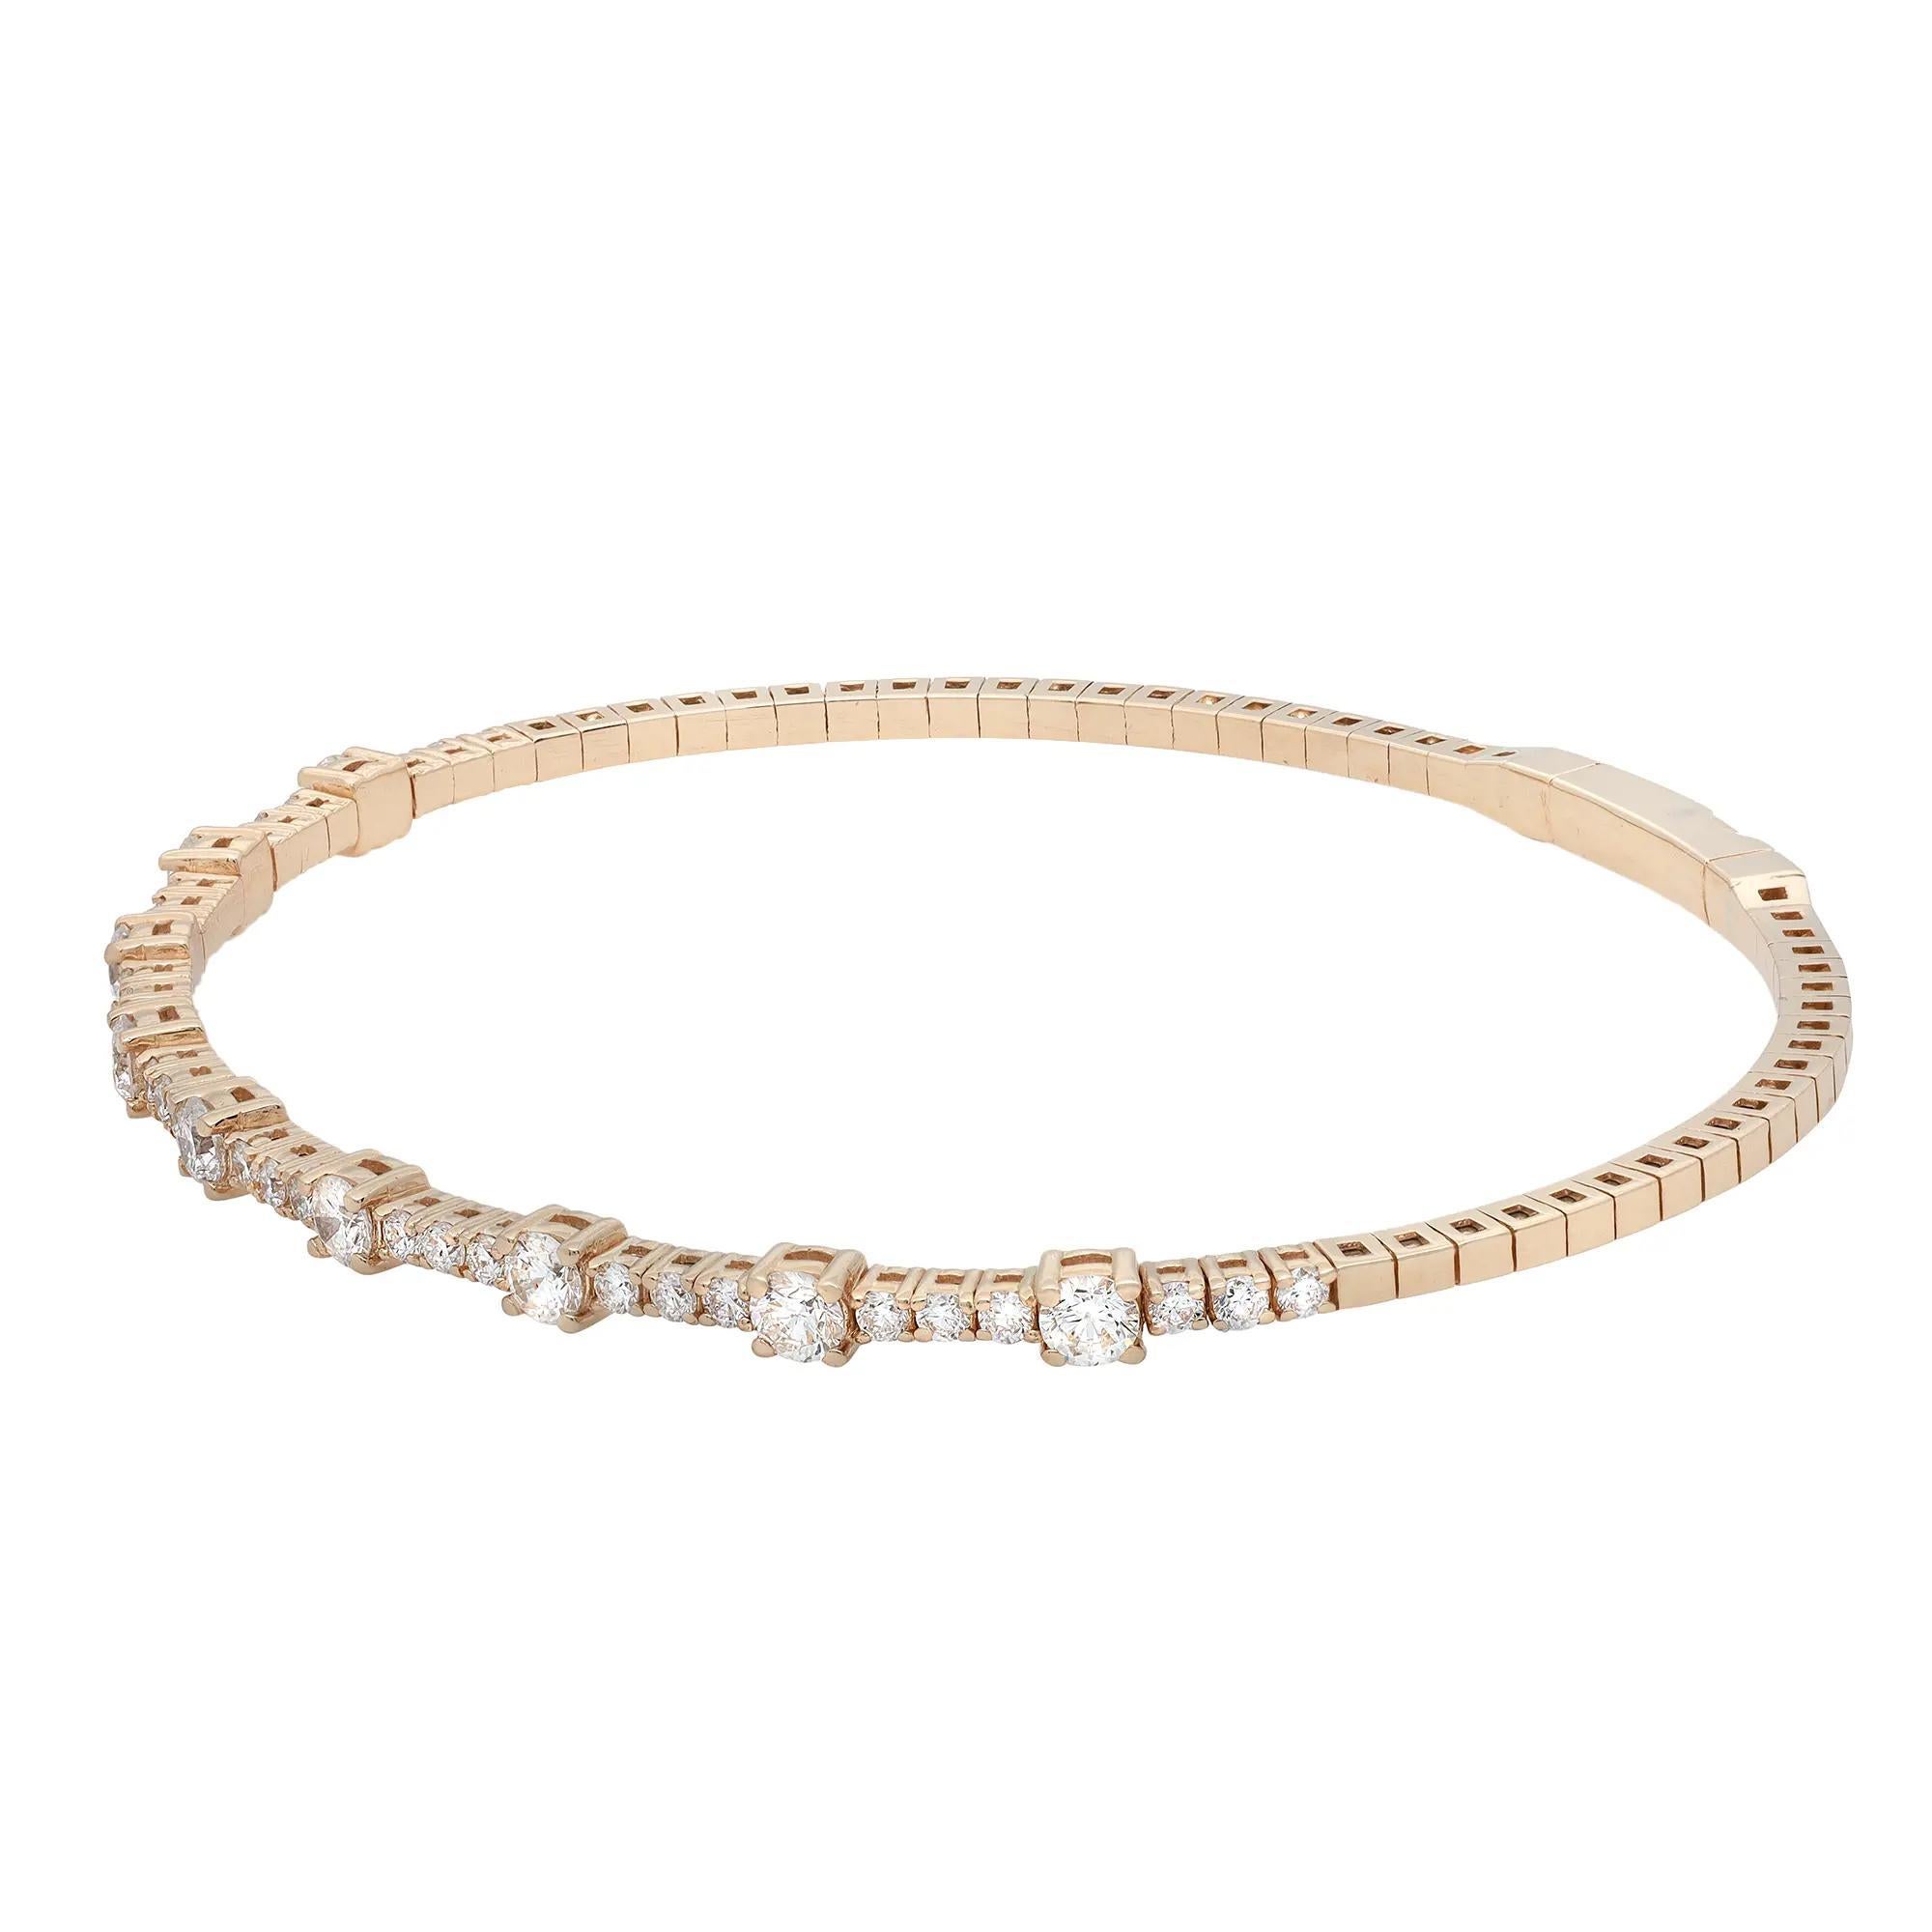 A classic look with easy elegance, this flexible diamond bangle bracelet exudes sophistication. Features prong set round brilliant cut fine white diamonds weighing 1.51 carats, set halfway through the bangle. Crafted in high polished 18K yellow